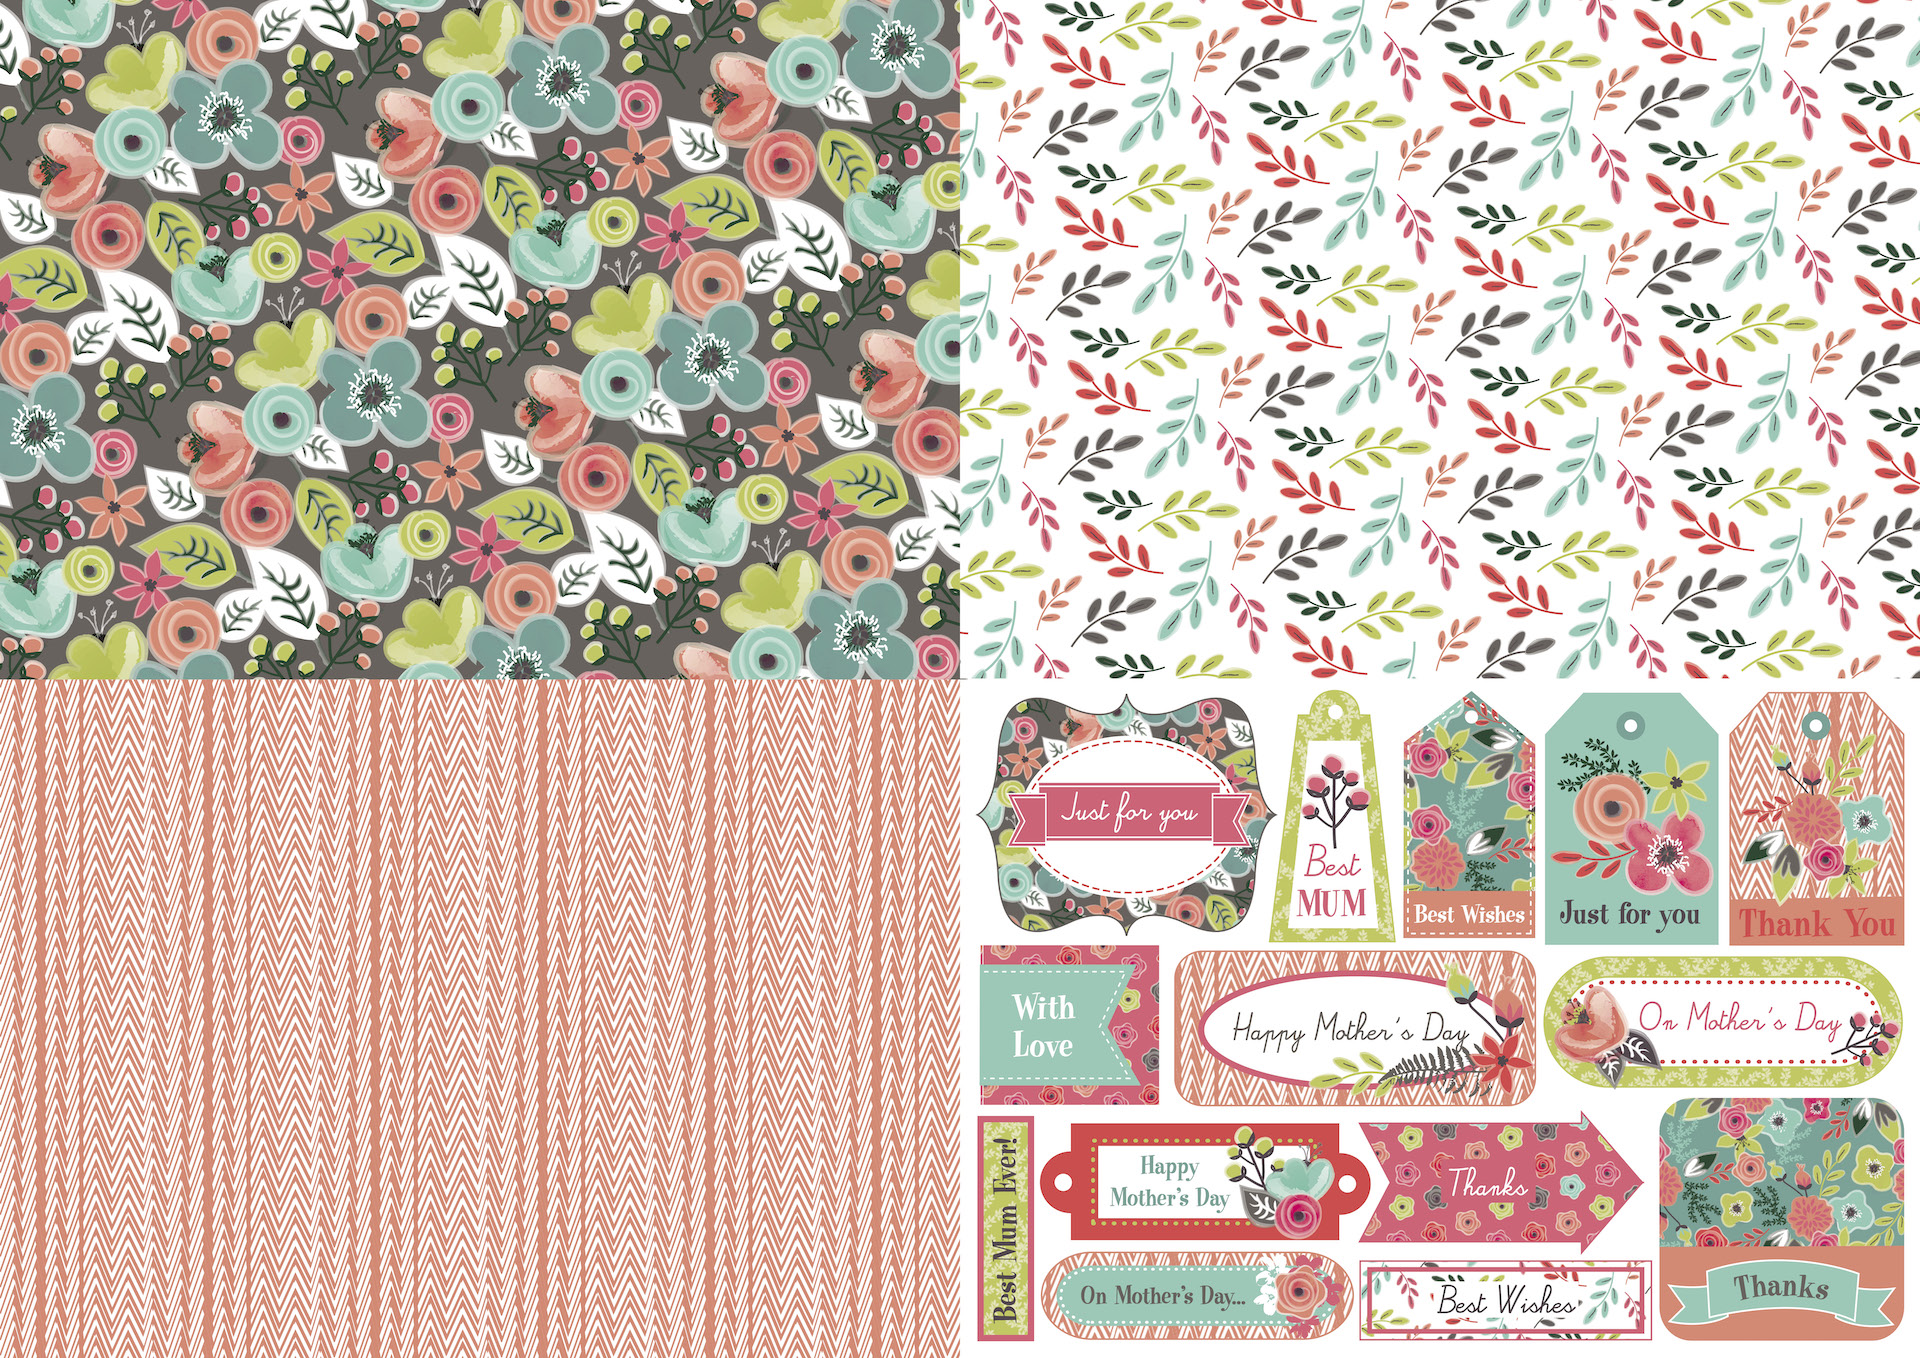 Free Decorative Papers paper craft download